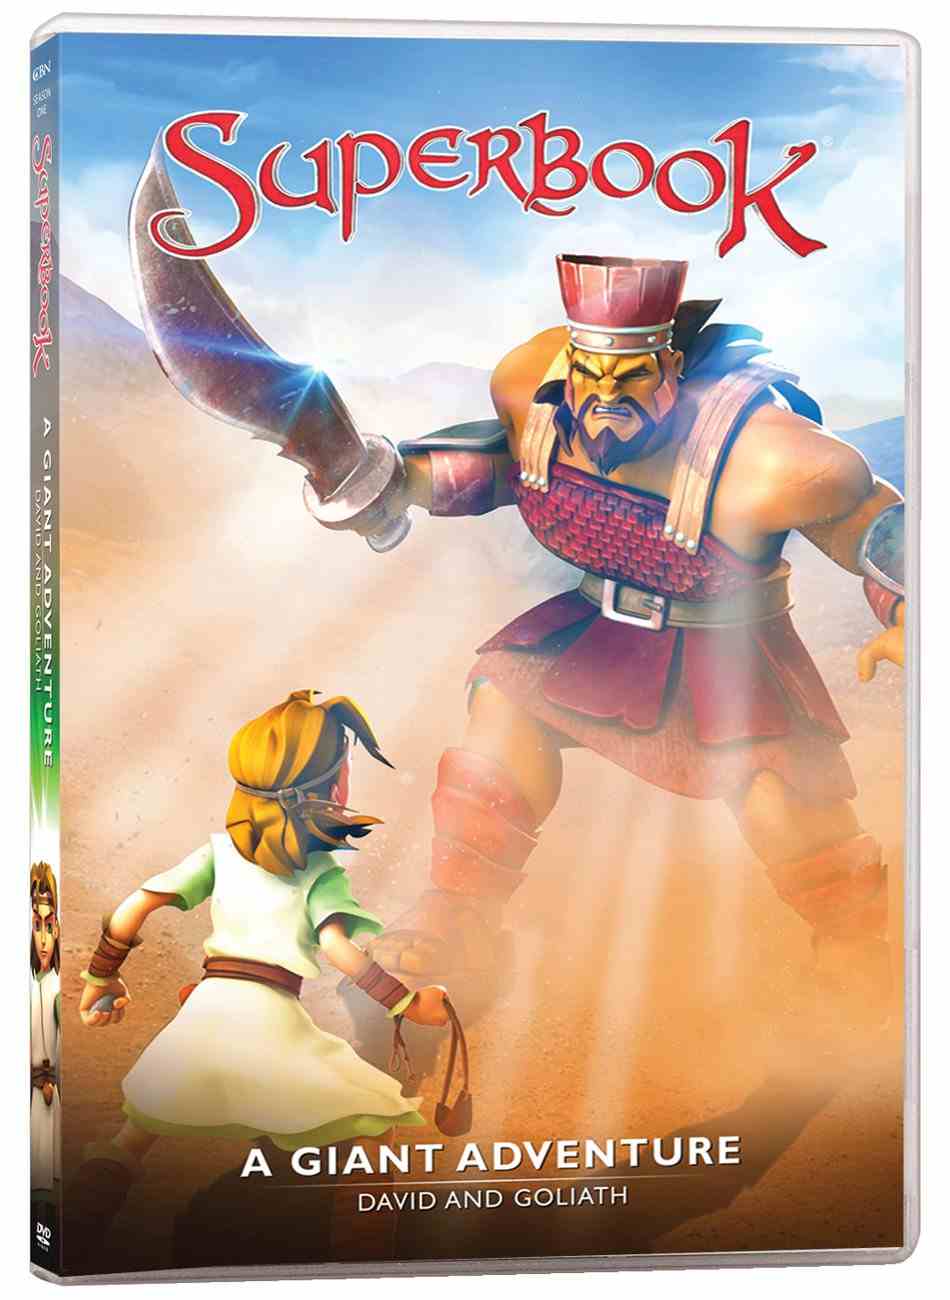 Giant Adventure, a - David and Goliath (#05 in Superbook Dvd Series Season  01) | Koorong